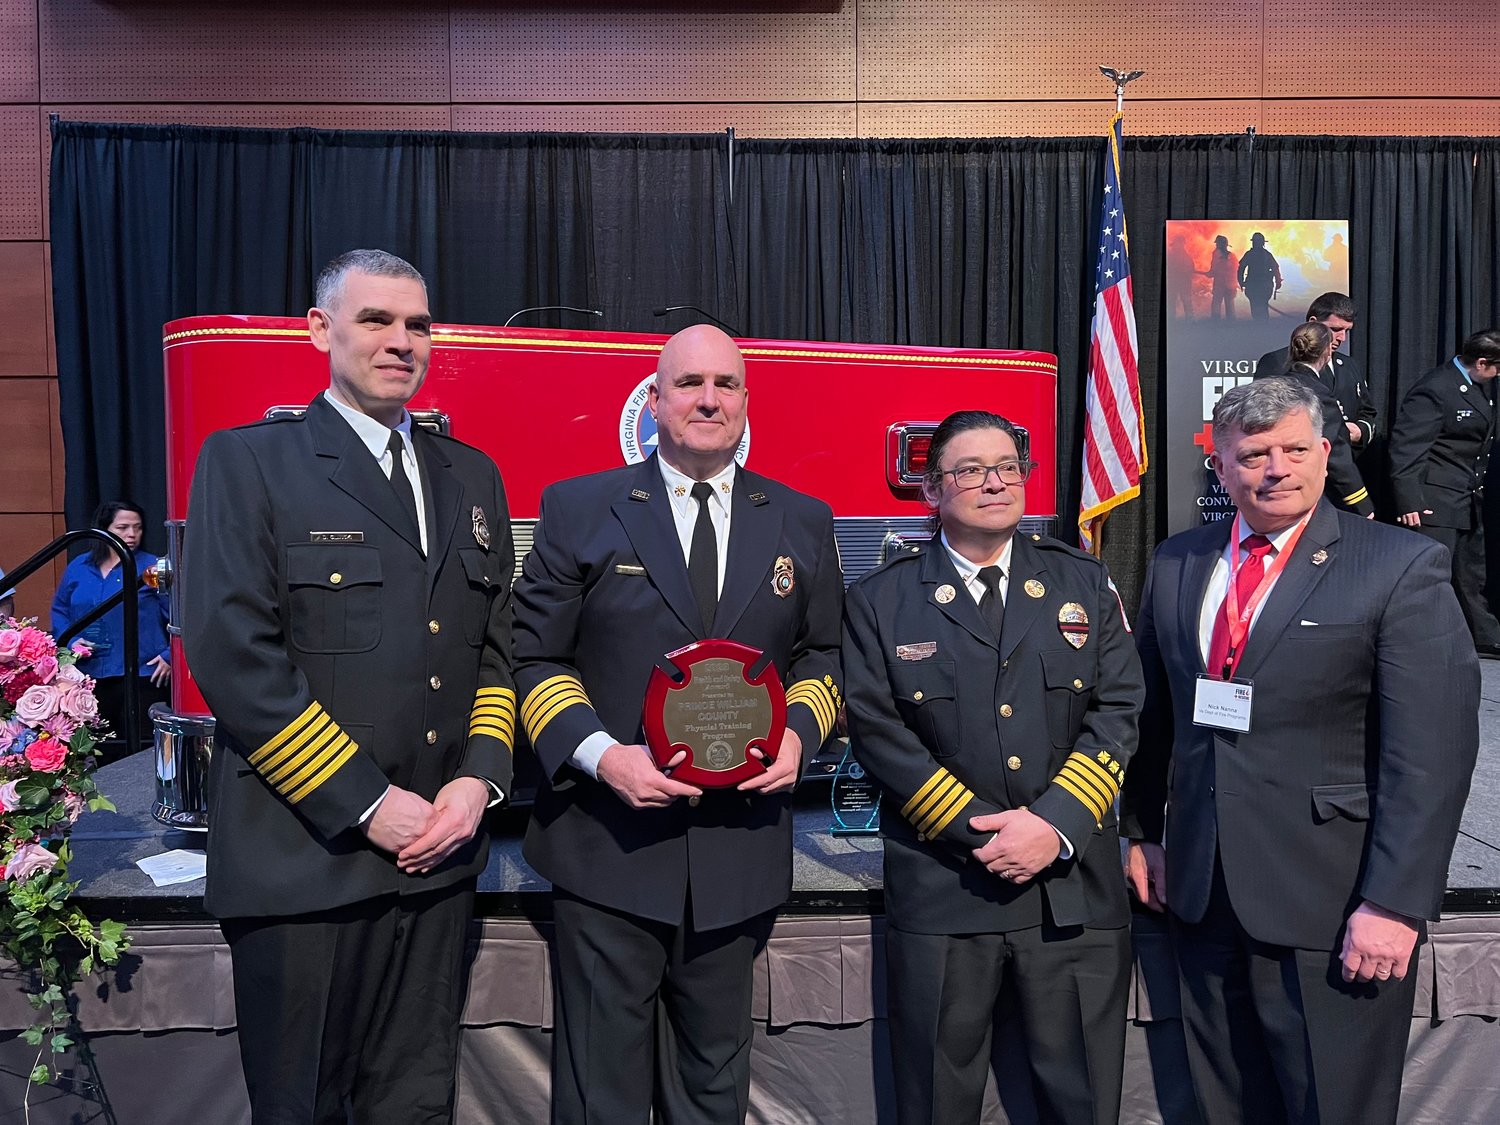 Prince William County Fire & Rescue Honored for Outstanding Response